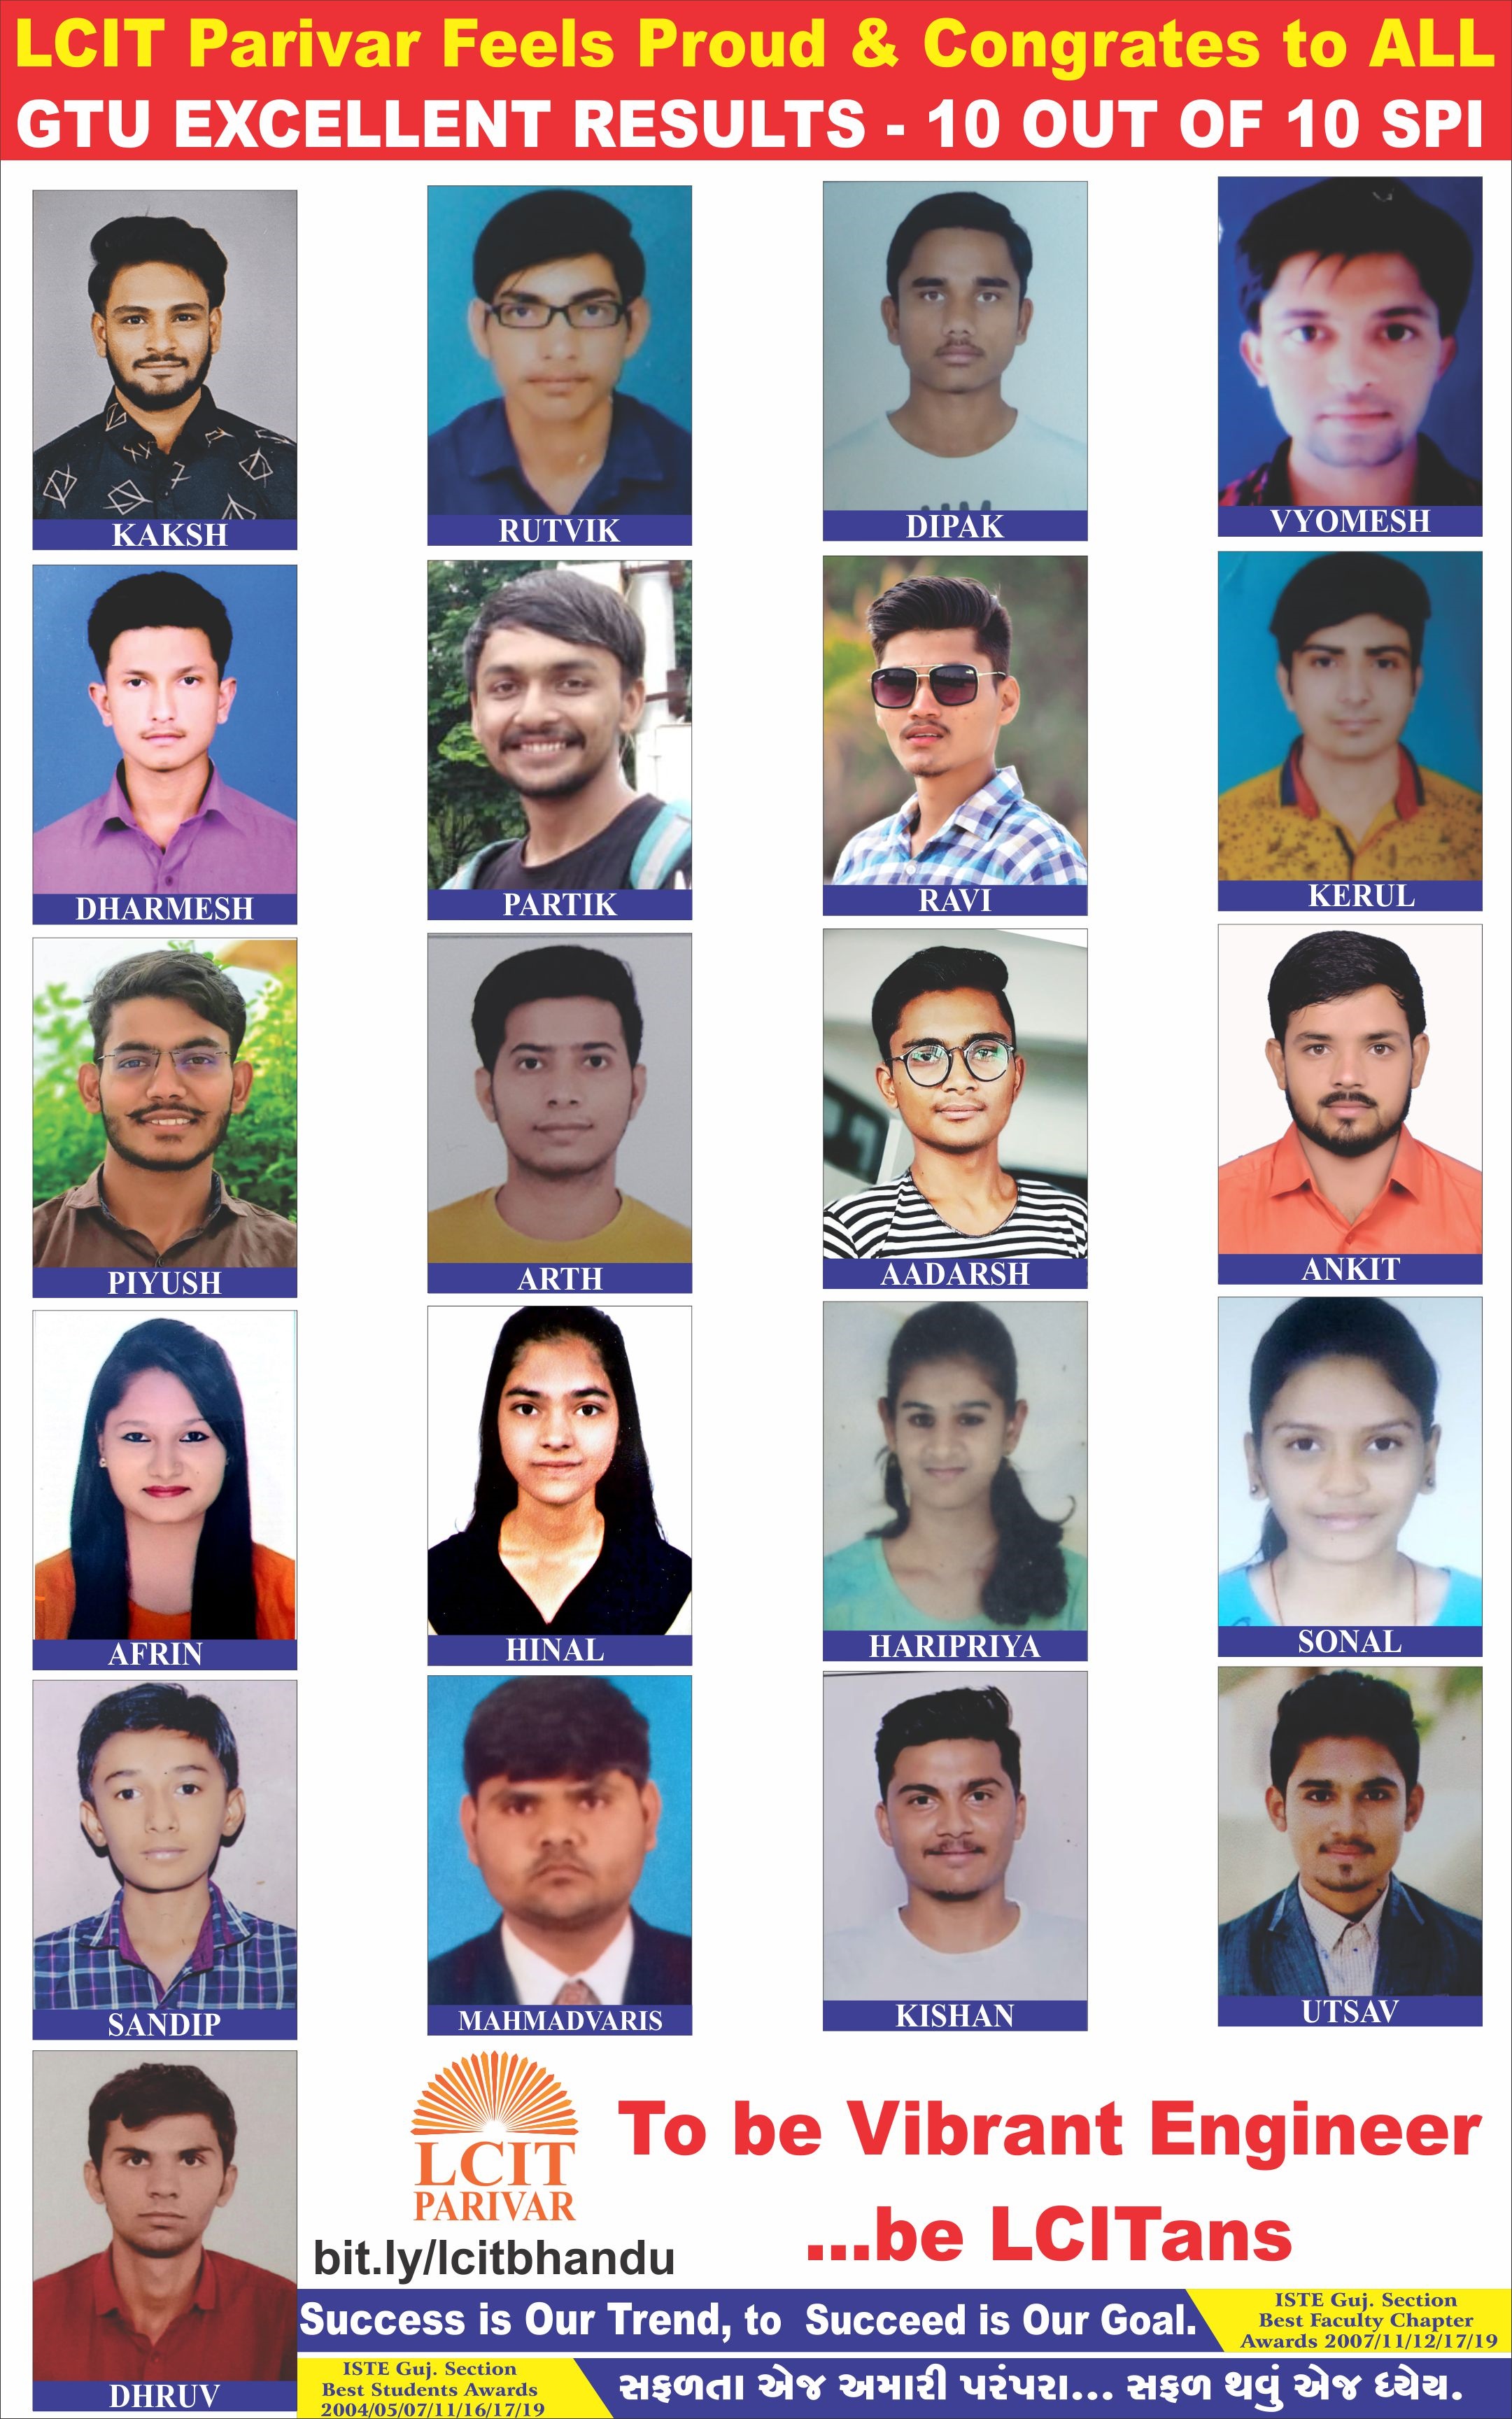 LCIT PARIVAR_FEELS PROUD AND CONGRATULATES TO STUDENTS FOR GTU EXCELLENT RESULTS_10 OUT OF 10 SPI